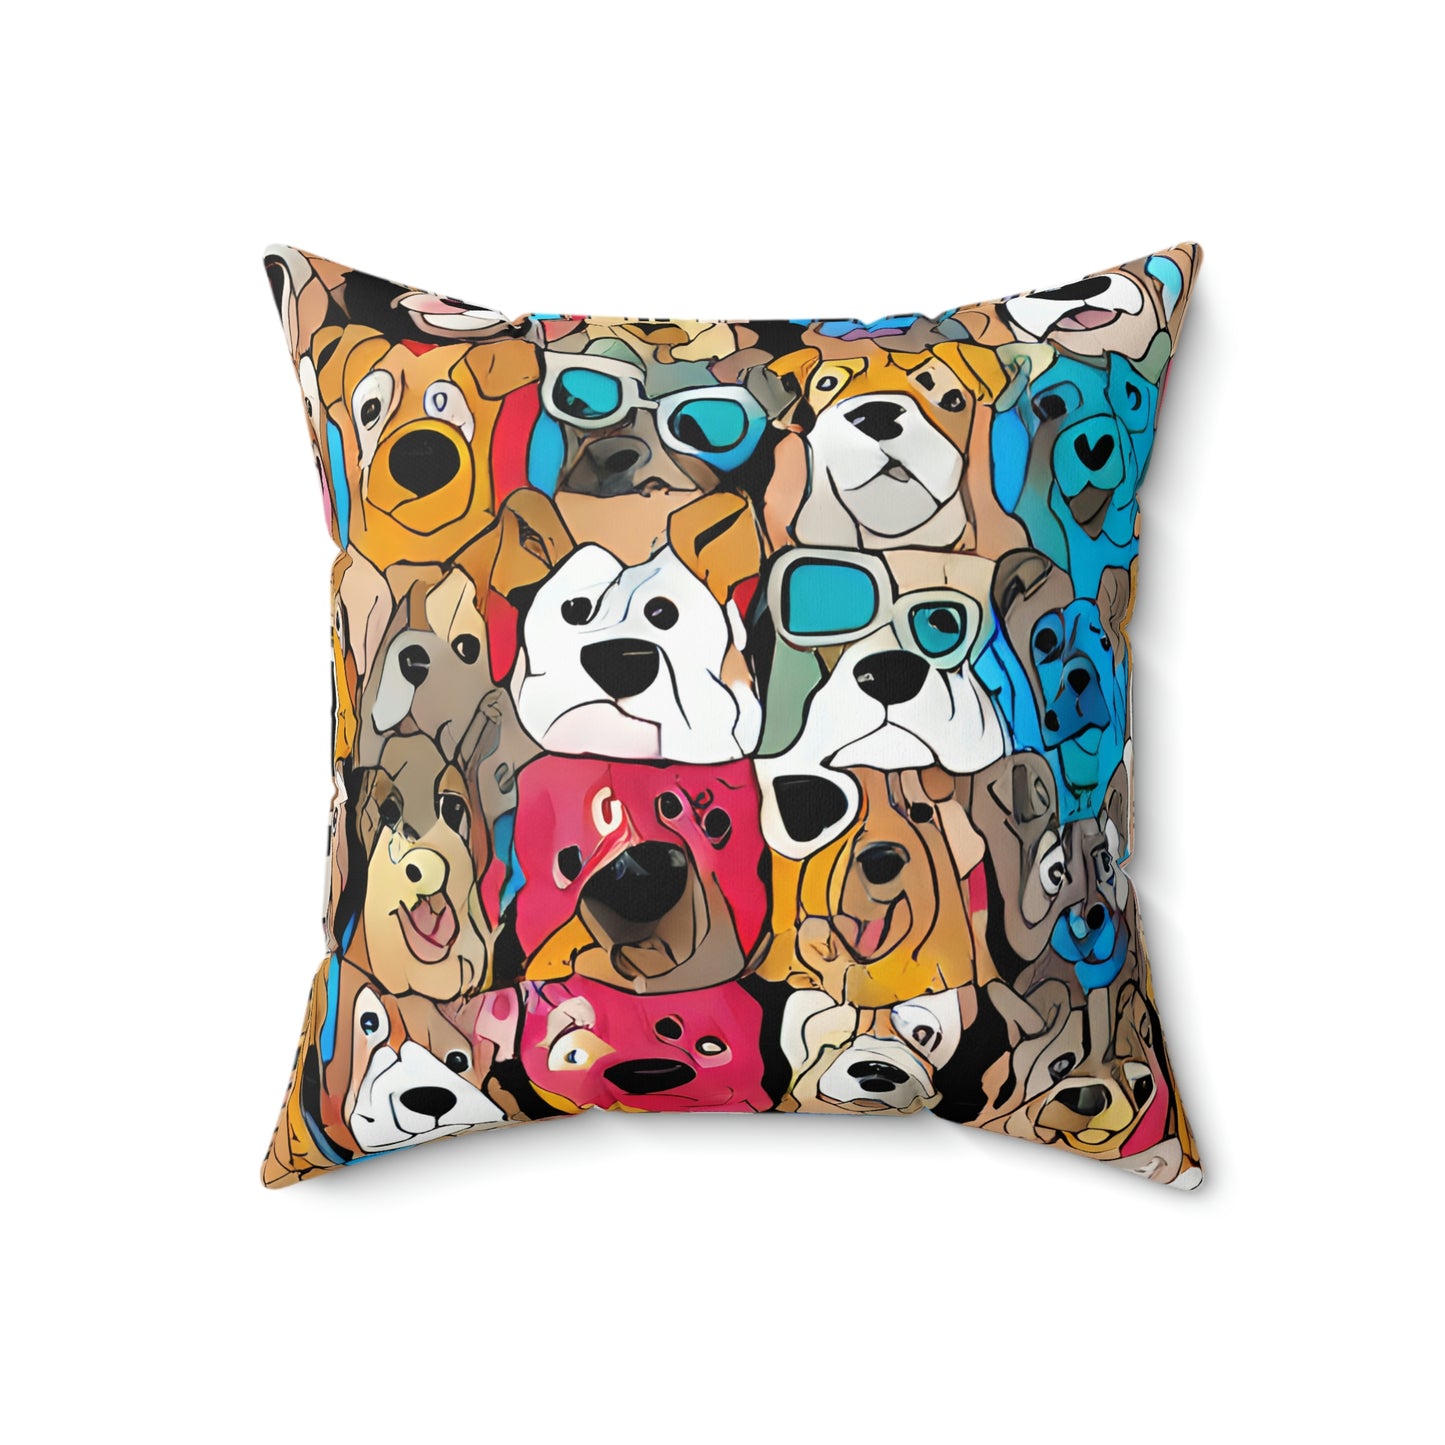 Dog Lovers Cartoon Style Pillow & Cover, Fun, Bright, Happy Home Decor, Room Accent, Indoor Pillow, Artistic, Charming Addition Living Space